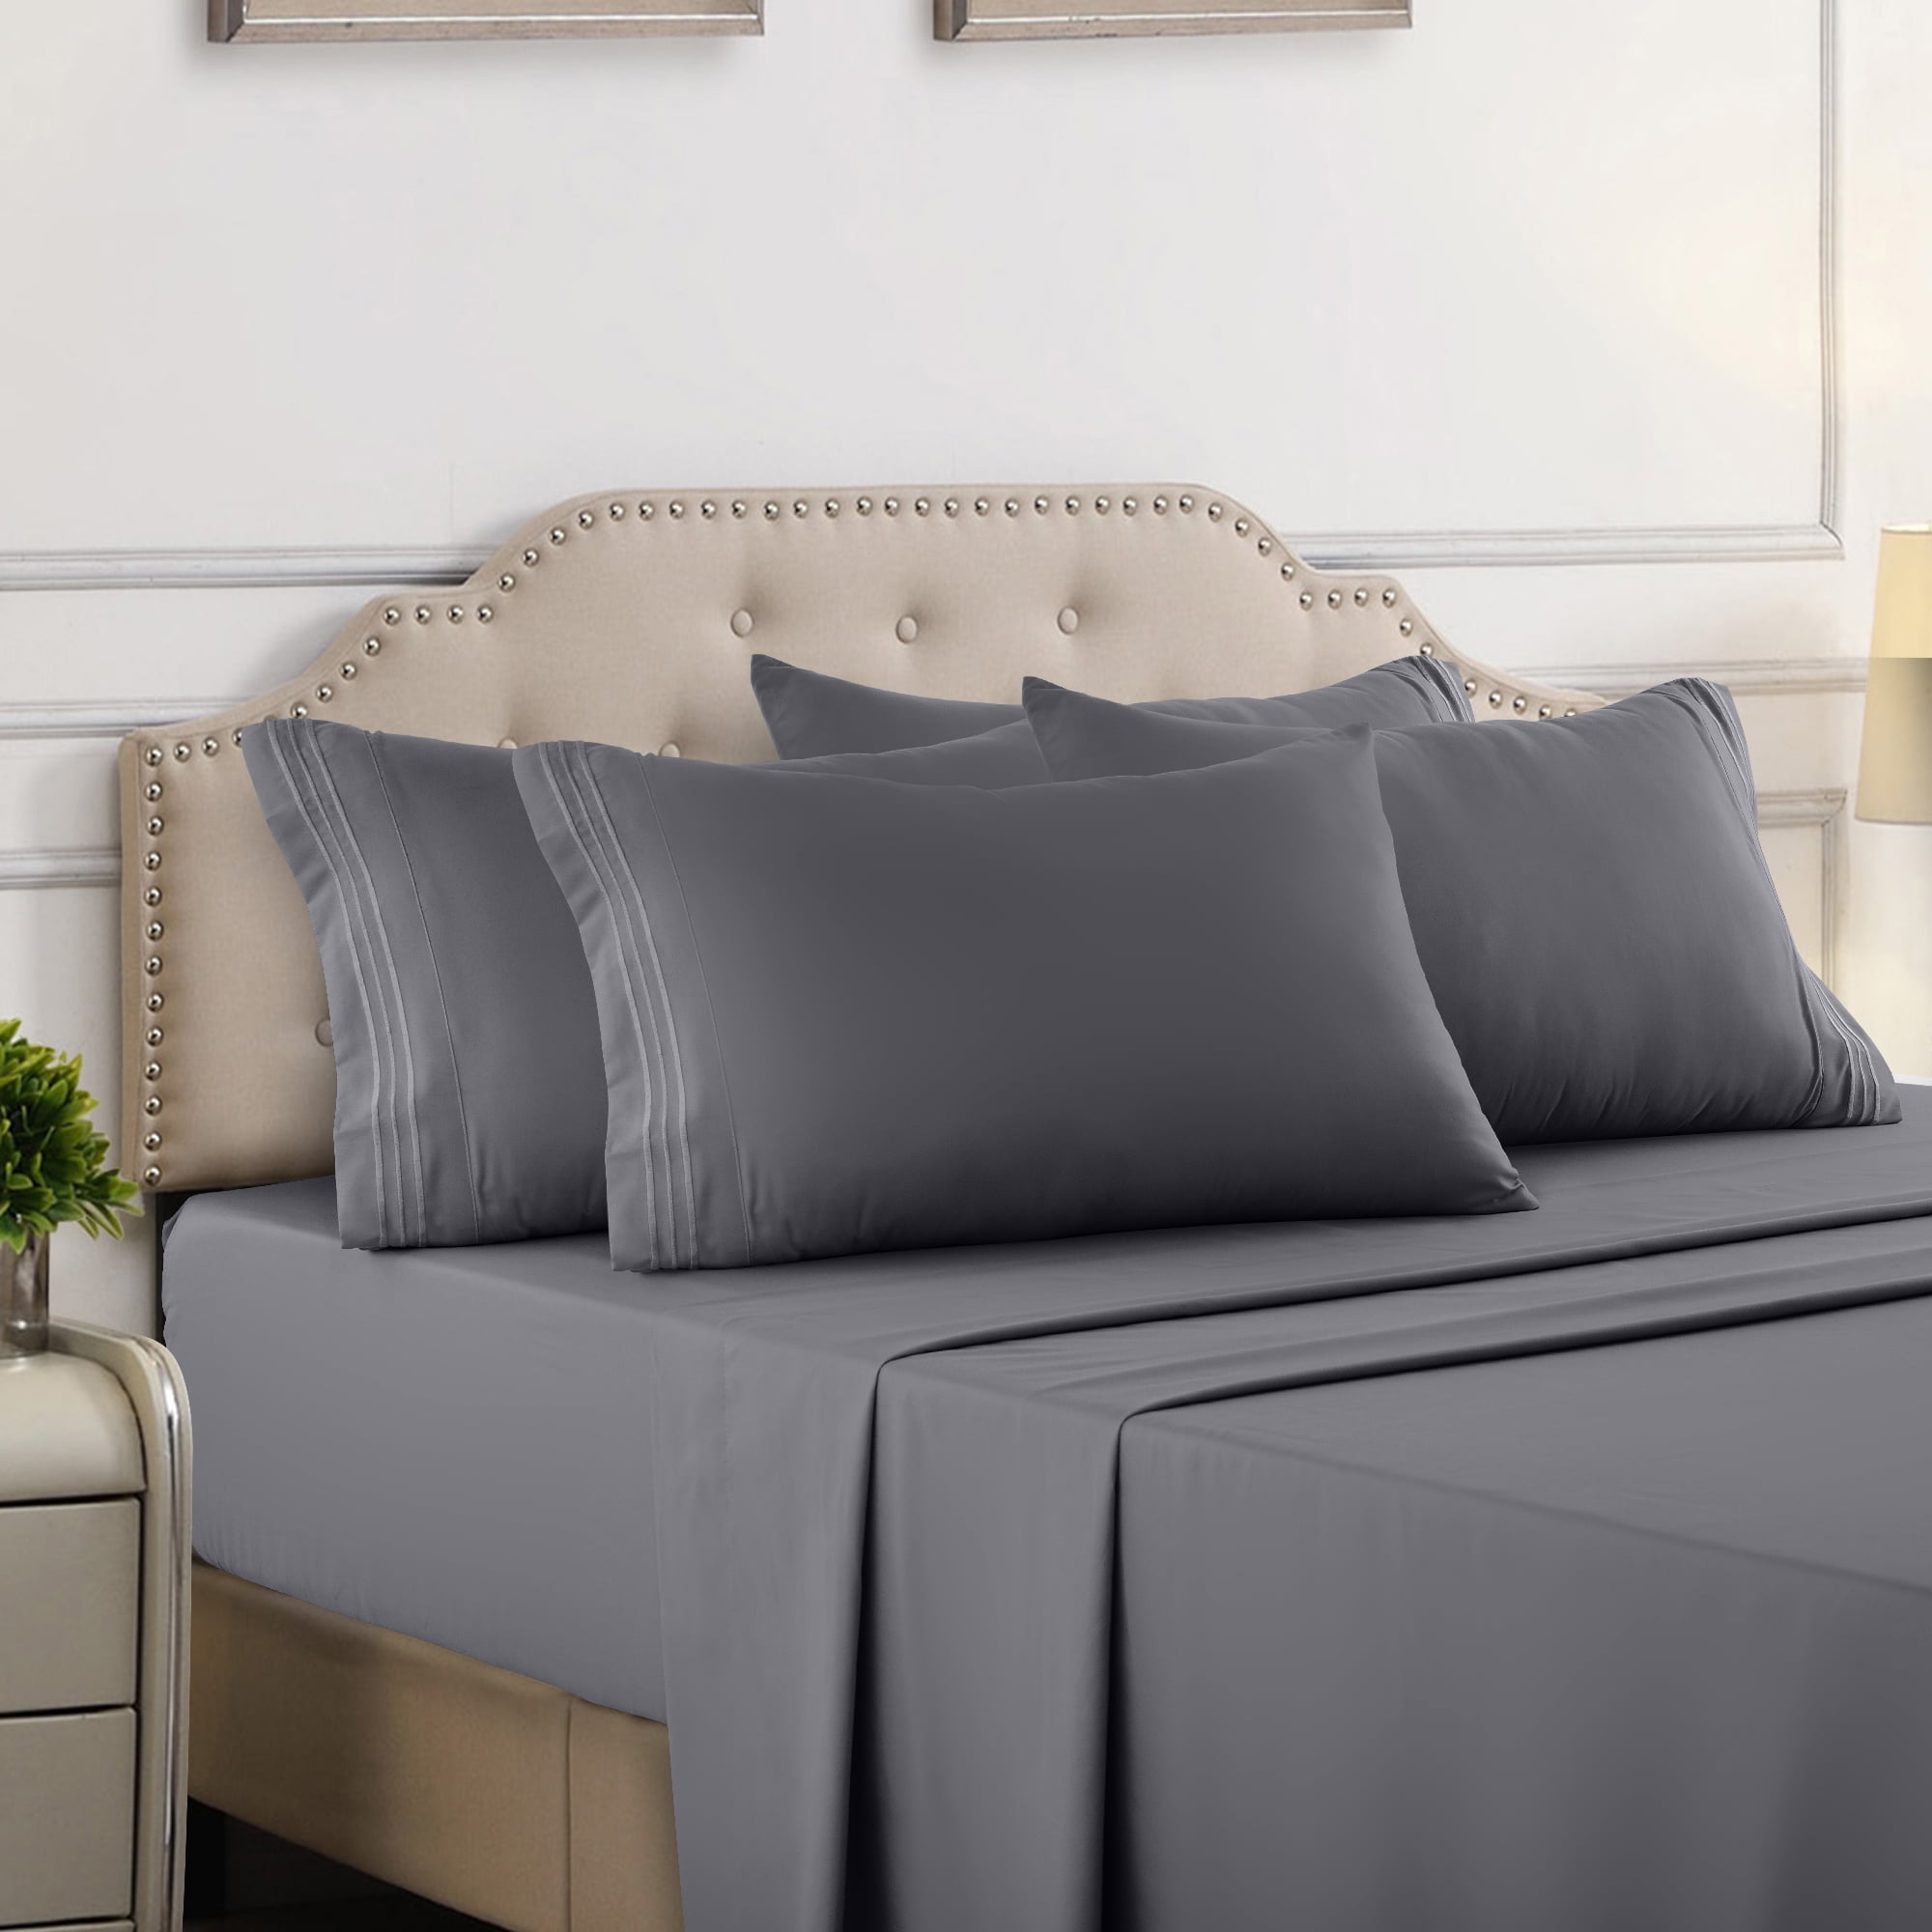 Lux Decor Collection Queen Sheets Set, Deep Pocket 6 Pc Bed Sheets Set -  Wrinkle, Fade, Stain Resistant Queen Size Sheets, Gray